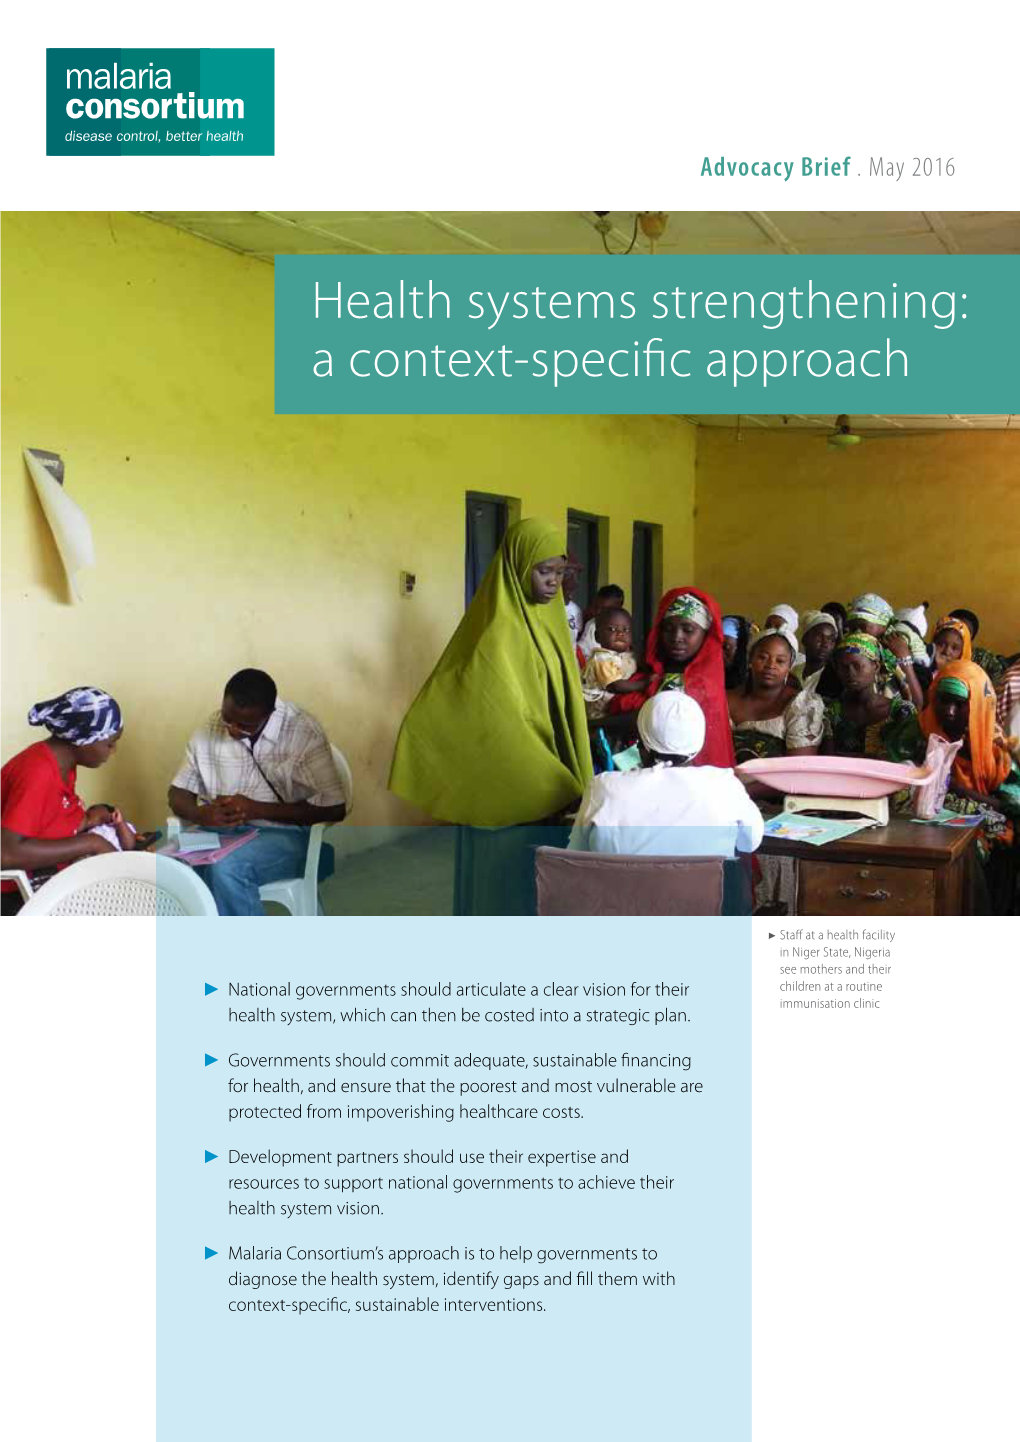 Health Systems Strengthening: a Context-Specific Approach